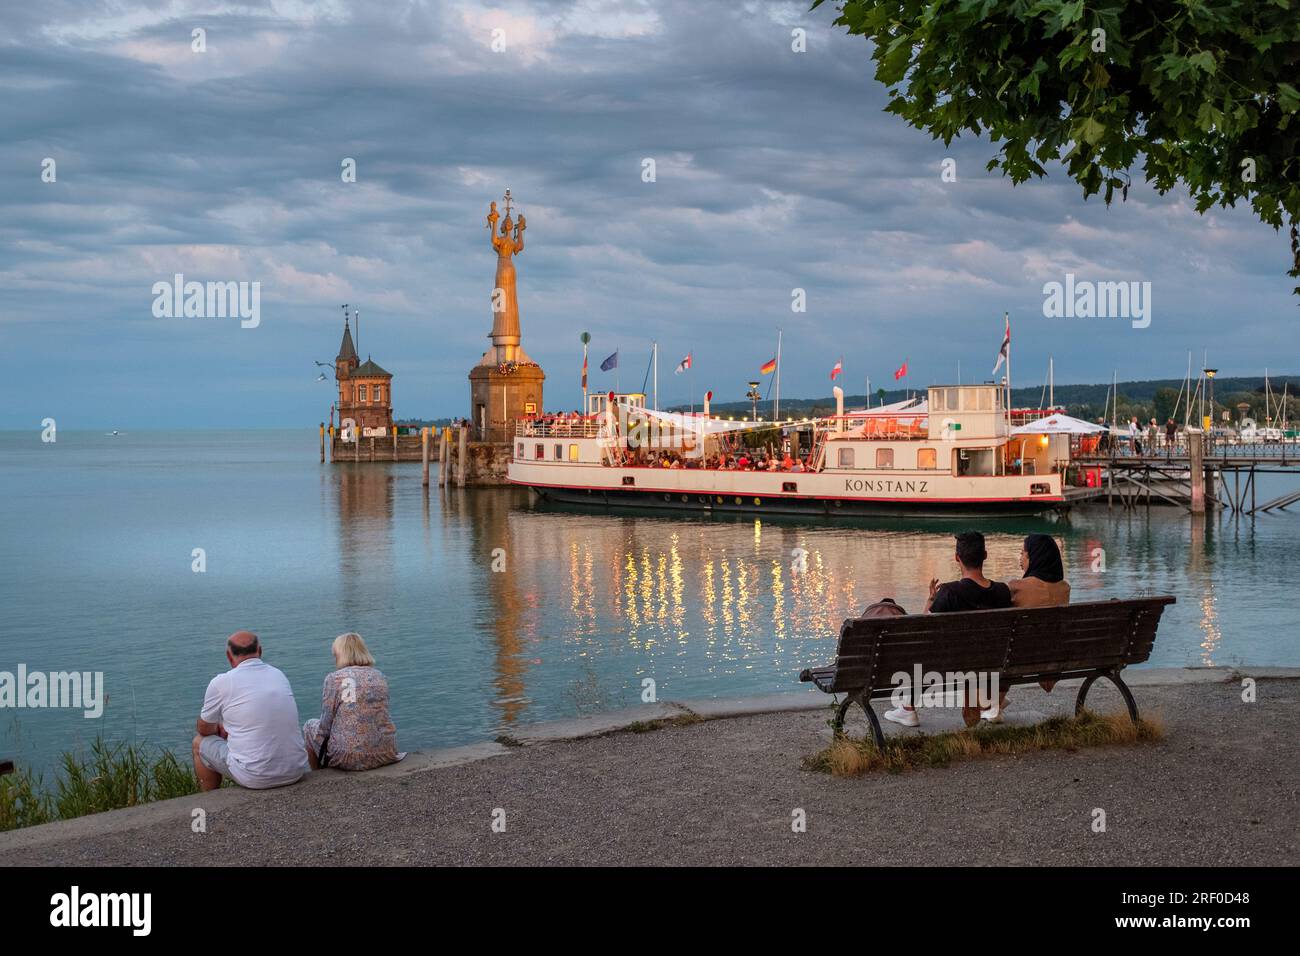 People relaxing on the banks on lake Constance, enjoying the view over the harbour,Imperia Statue in sight,Konstanz,Baden-Wurttemberg,Germany Stock Photo